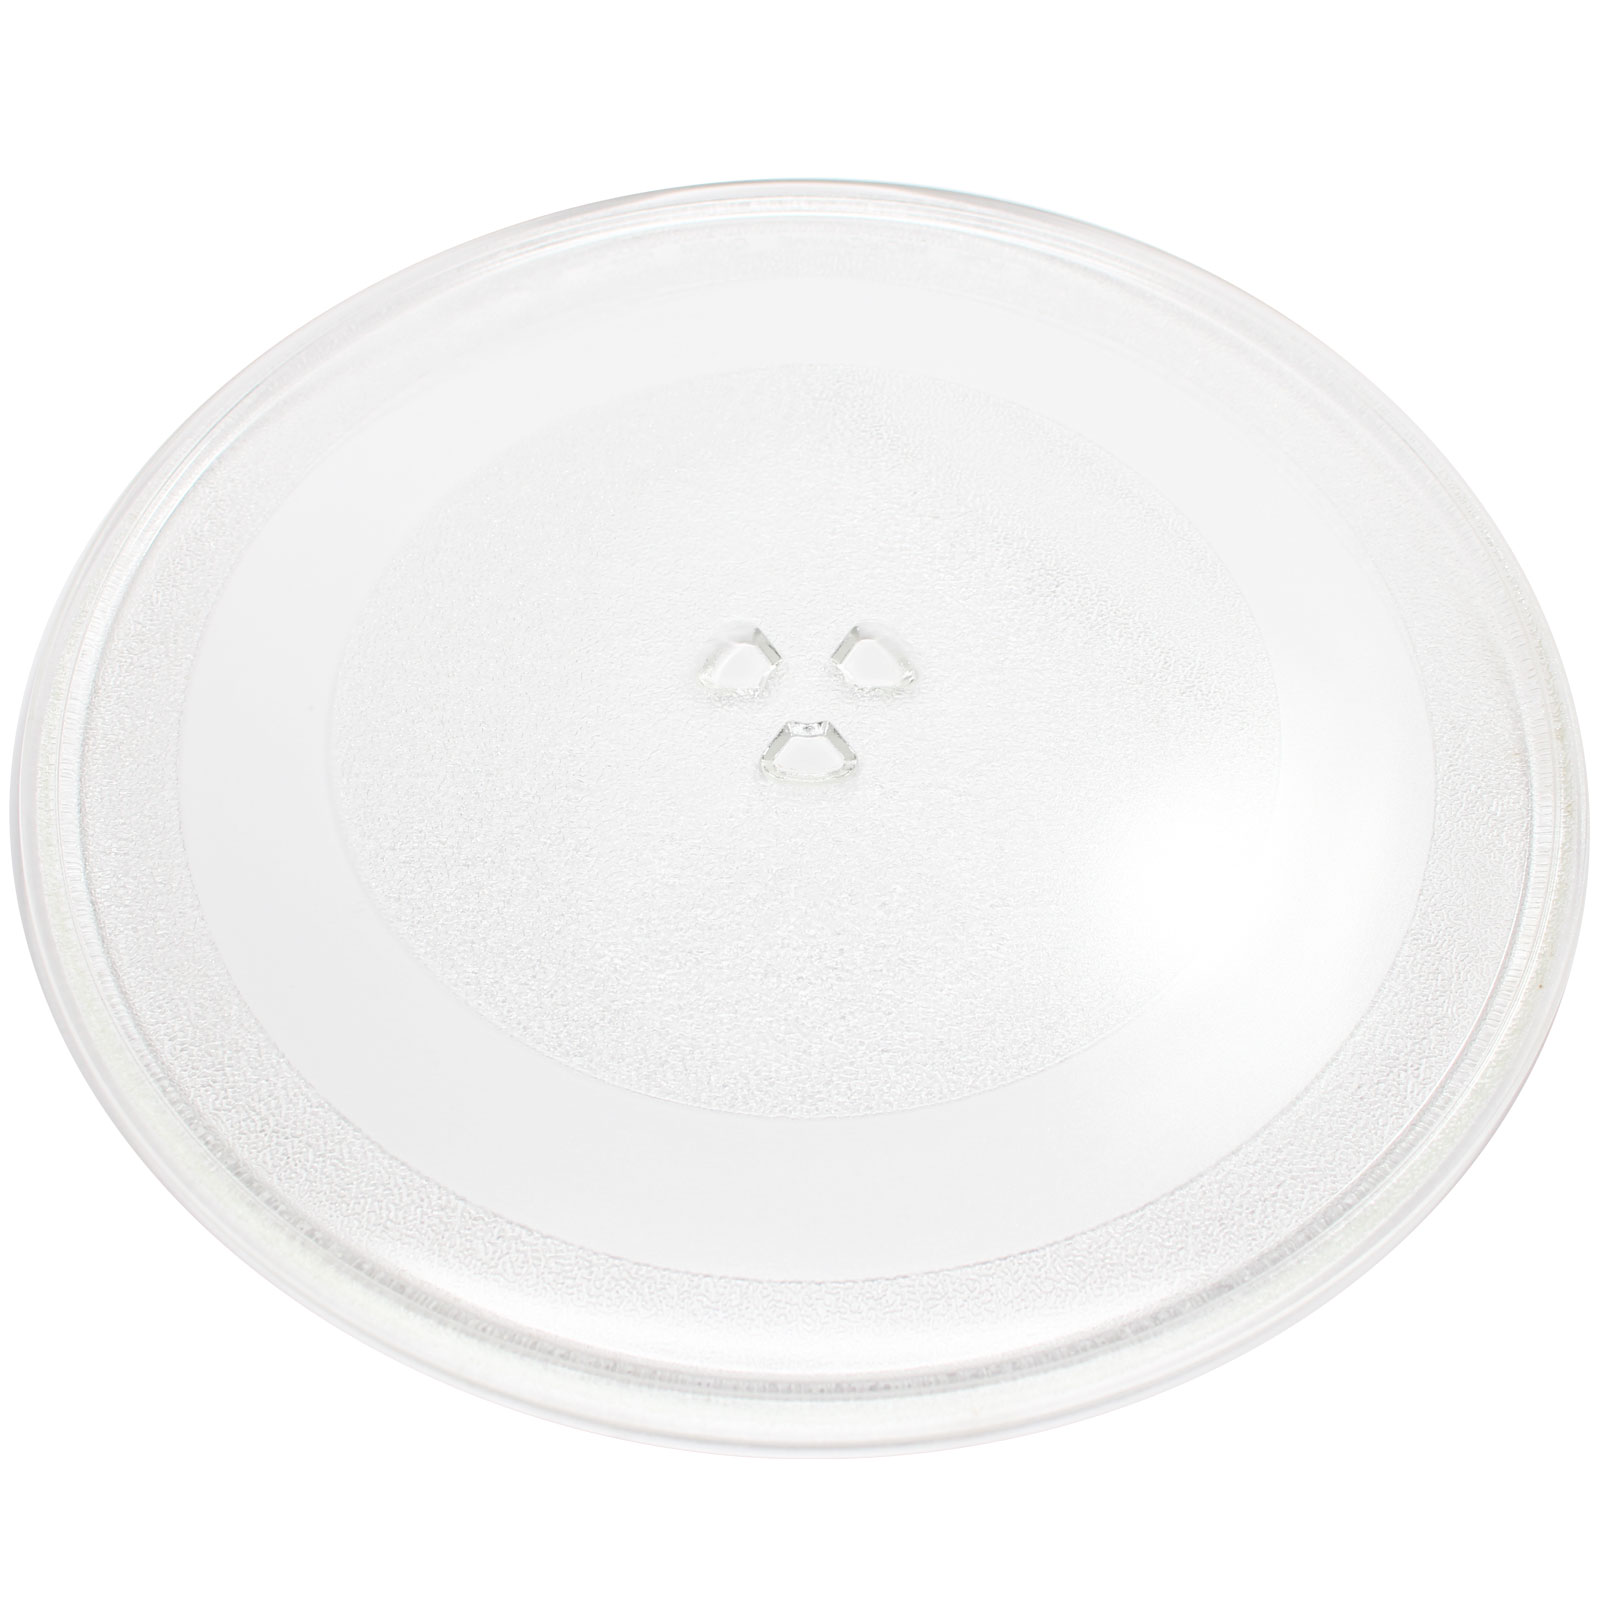 UpStart Components Replacement Sears/Kennmore 72188519900 Microwave Glass Plate  - For Sears/Kennmore 3390W1A019 Microwave Glass Tray - 13 1/2"